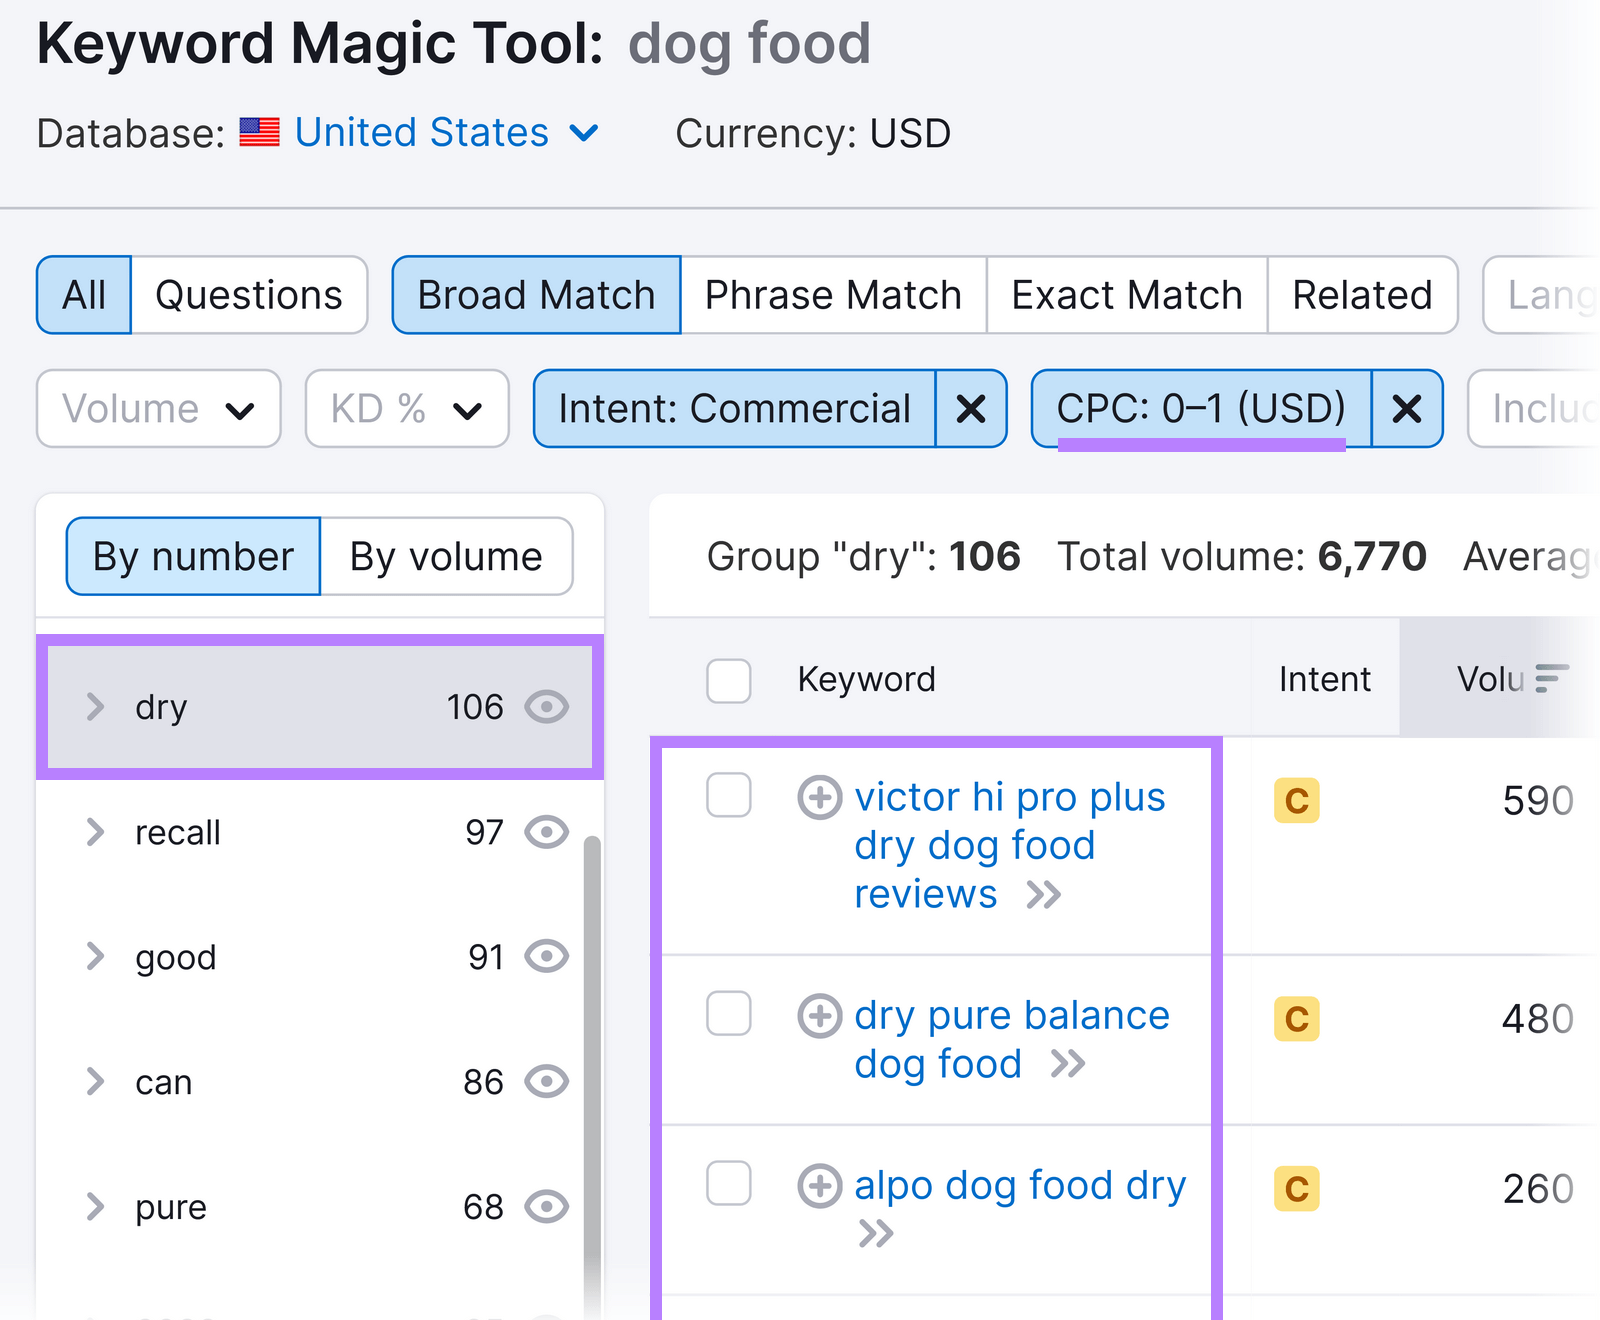 Keyword Magic Tool shows 106 results after applying filters